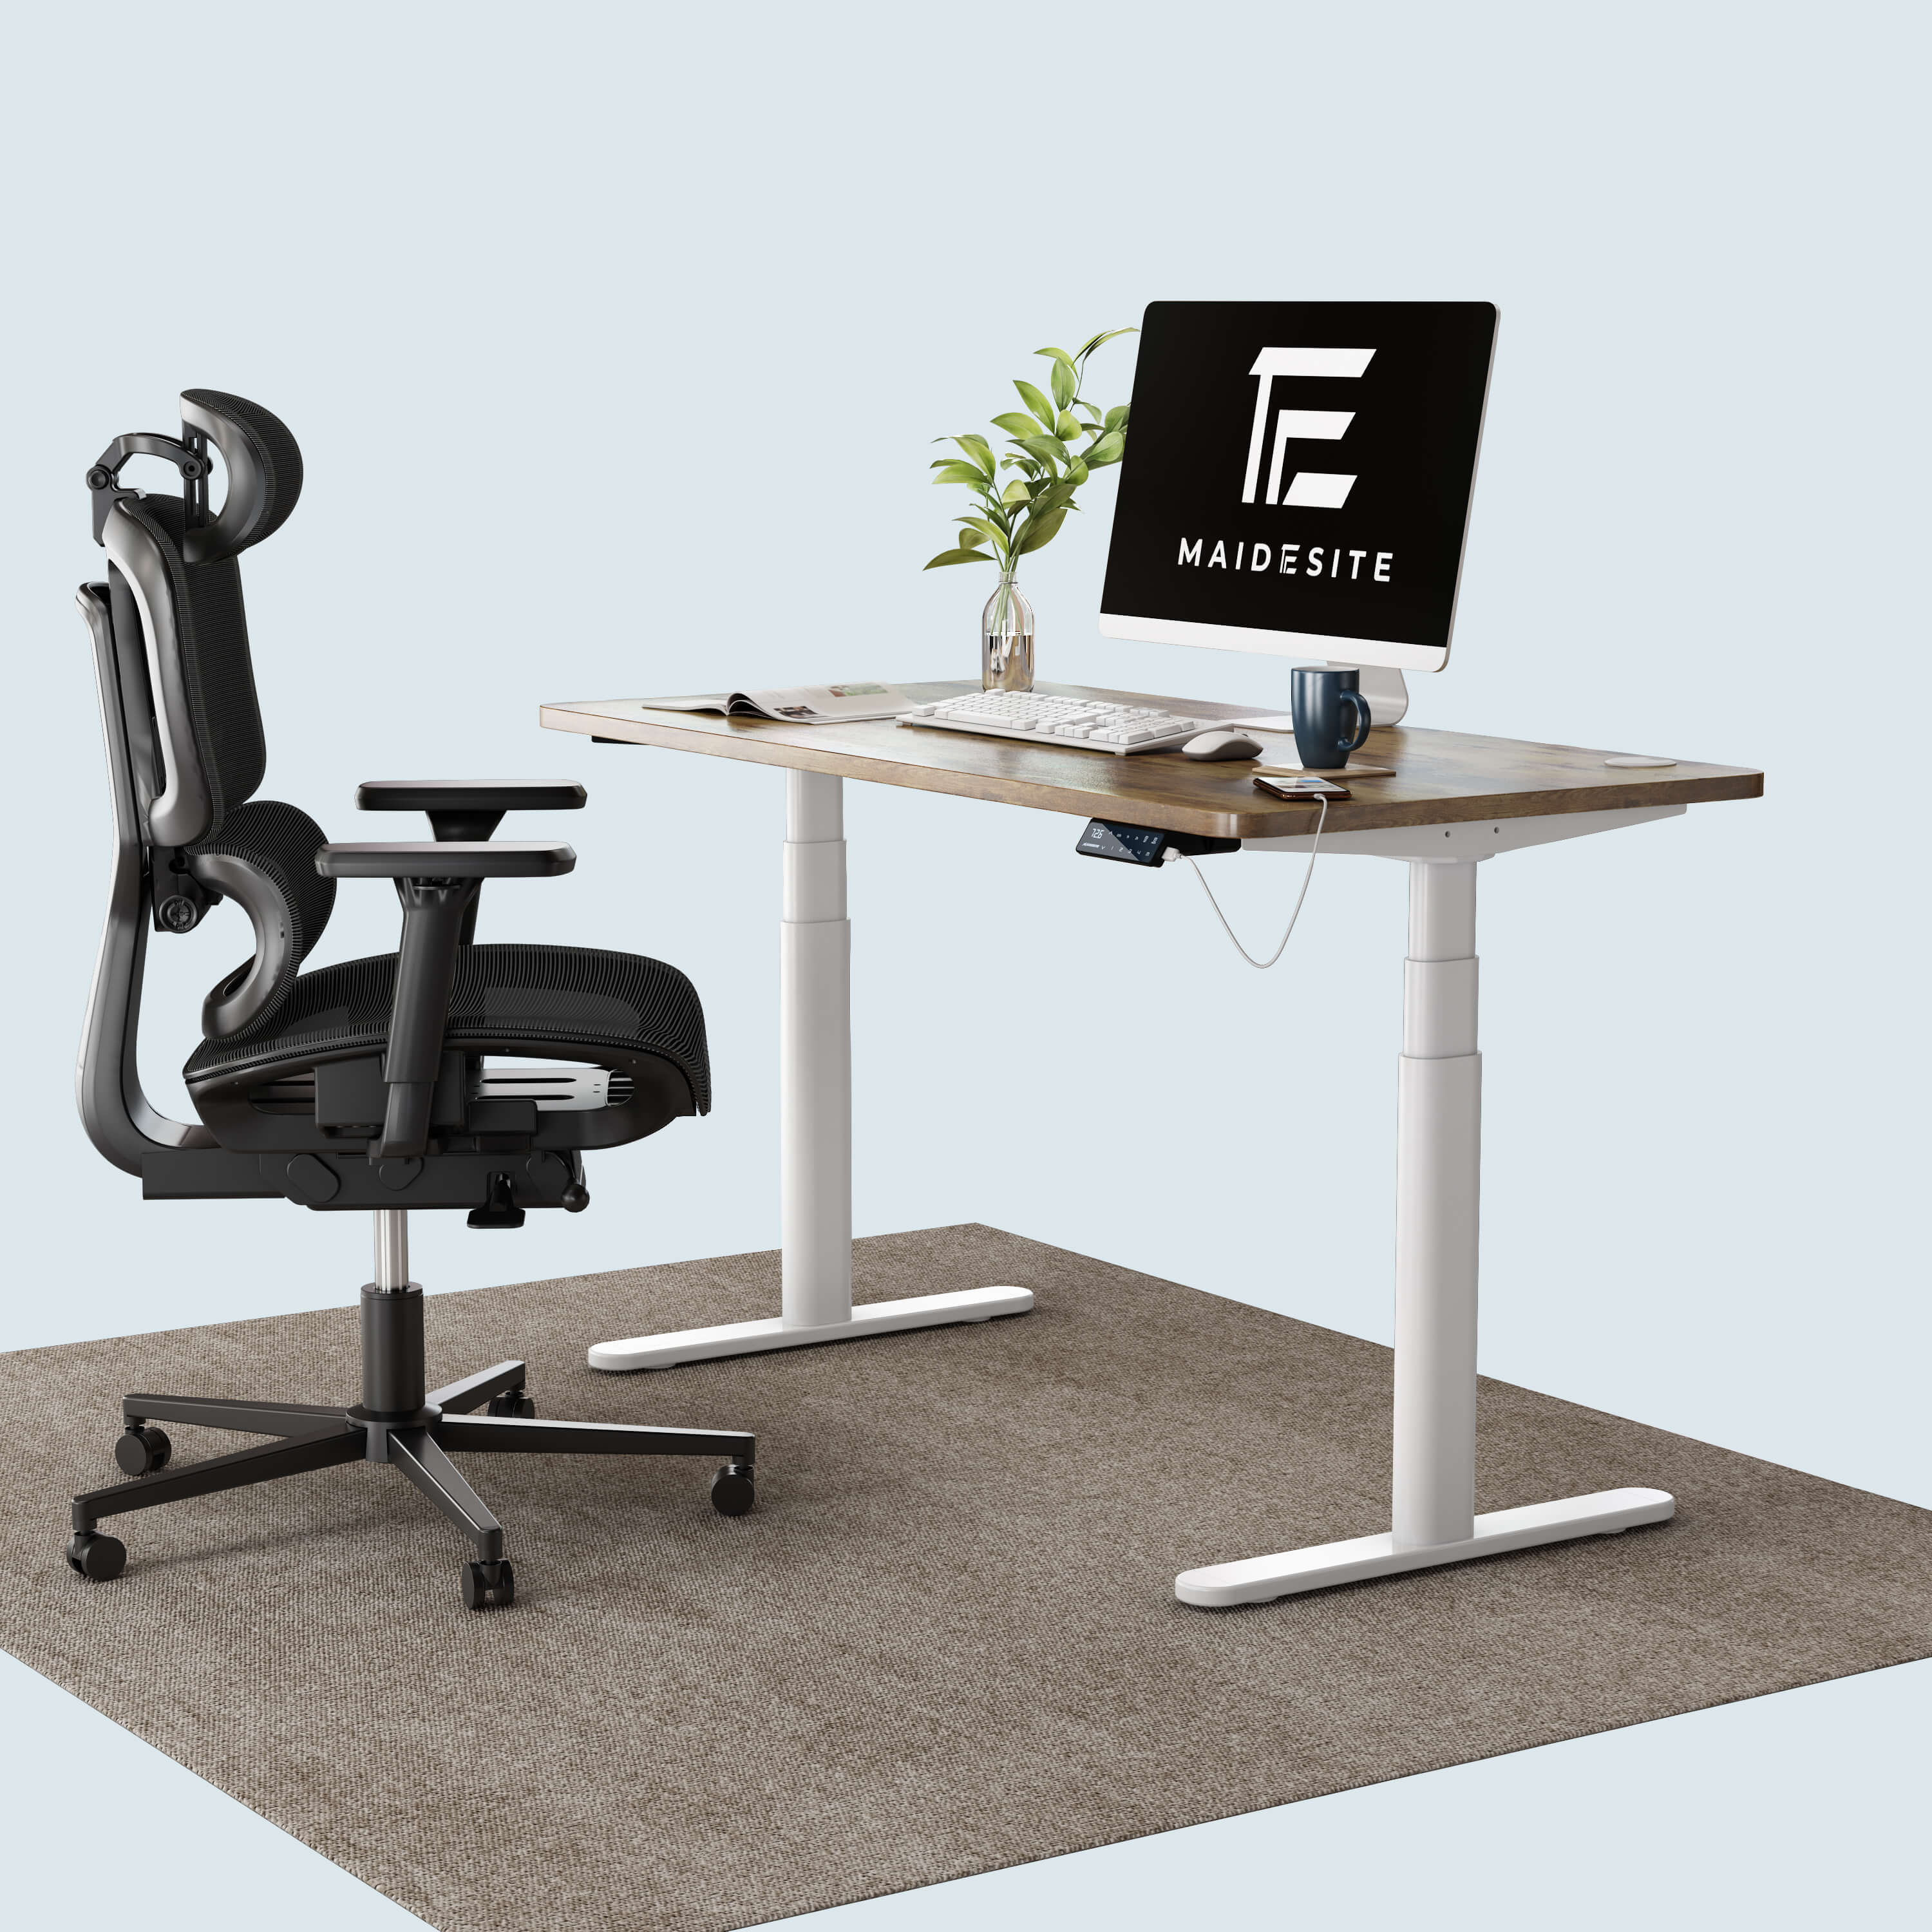 Maidesite Electric Adjustable-height Desk and Office Chair Bundle